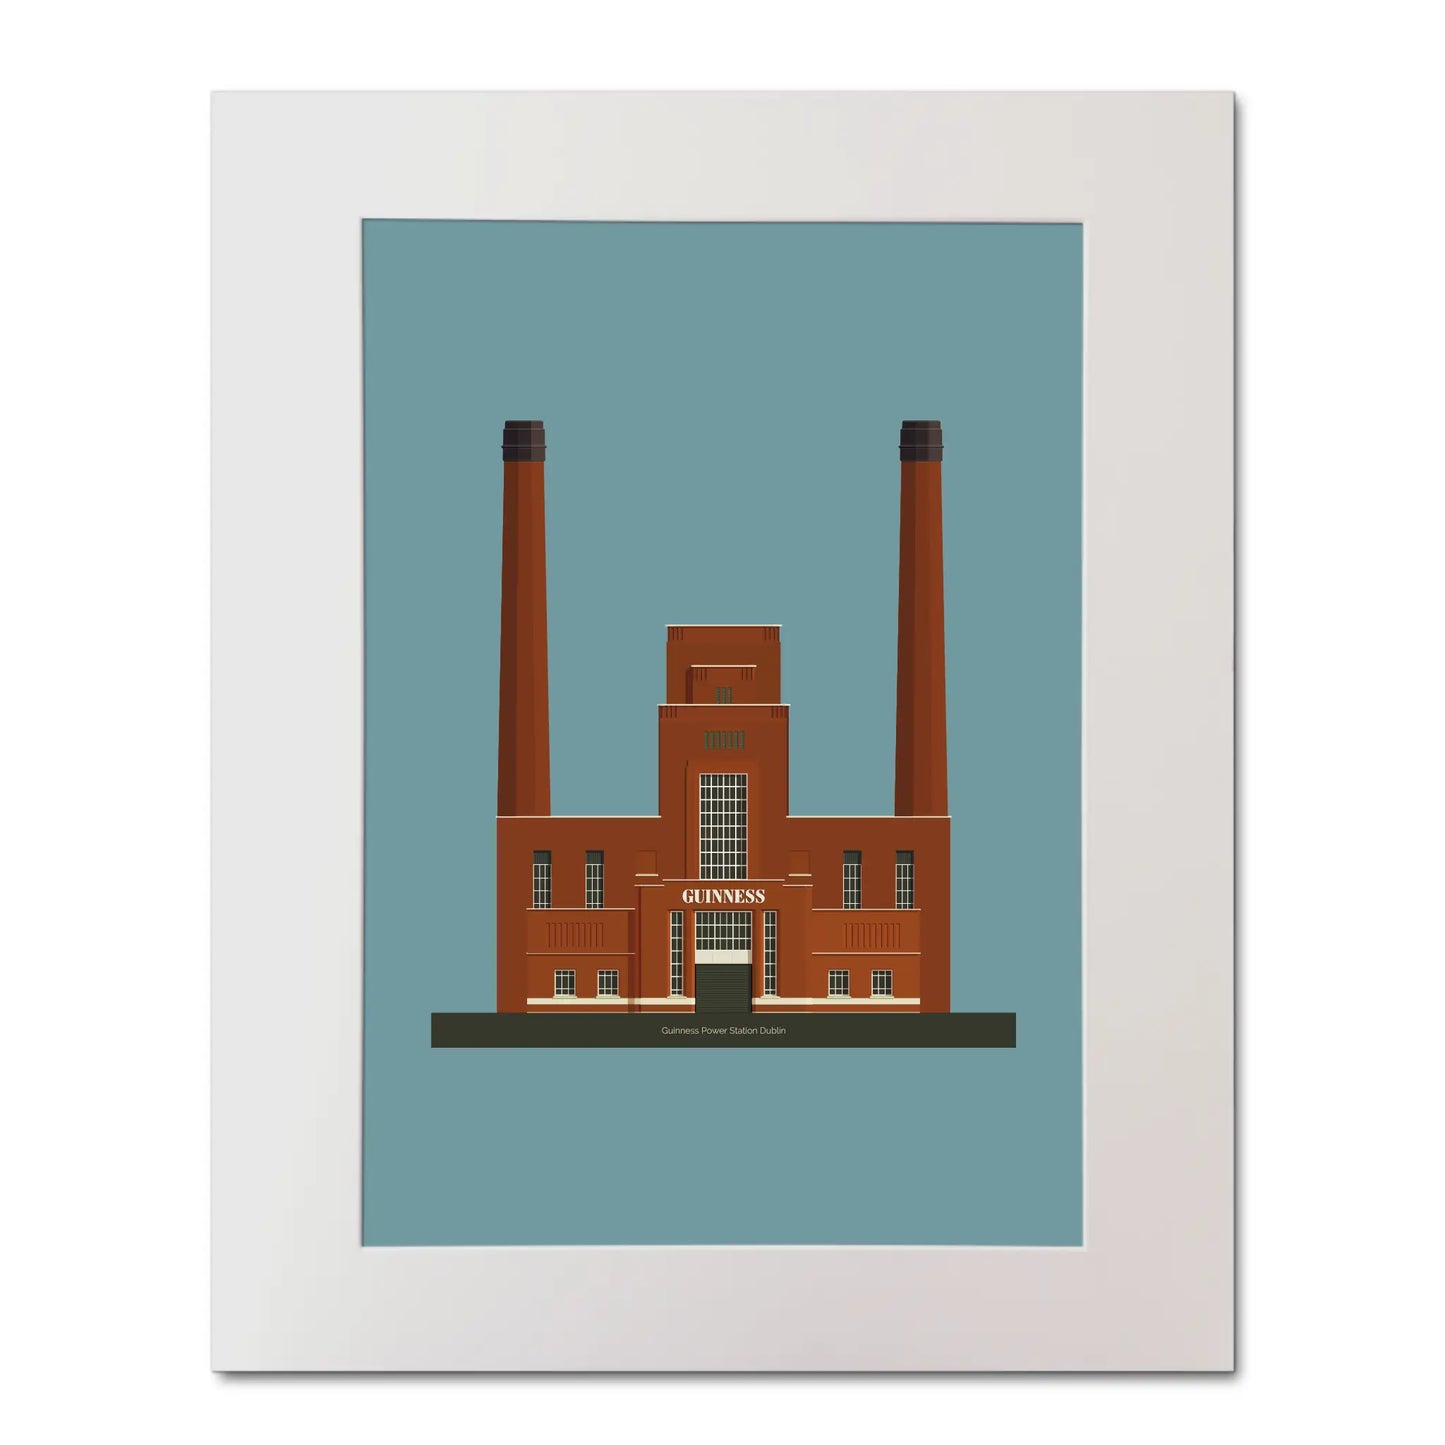 Mounted piece of wall art displaying the old Guinness brewery power plant in Dublin.